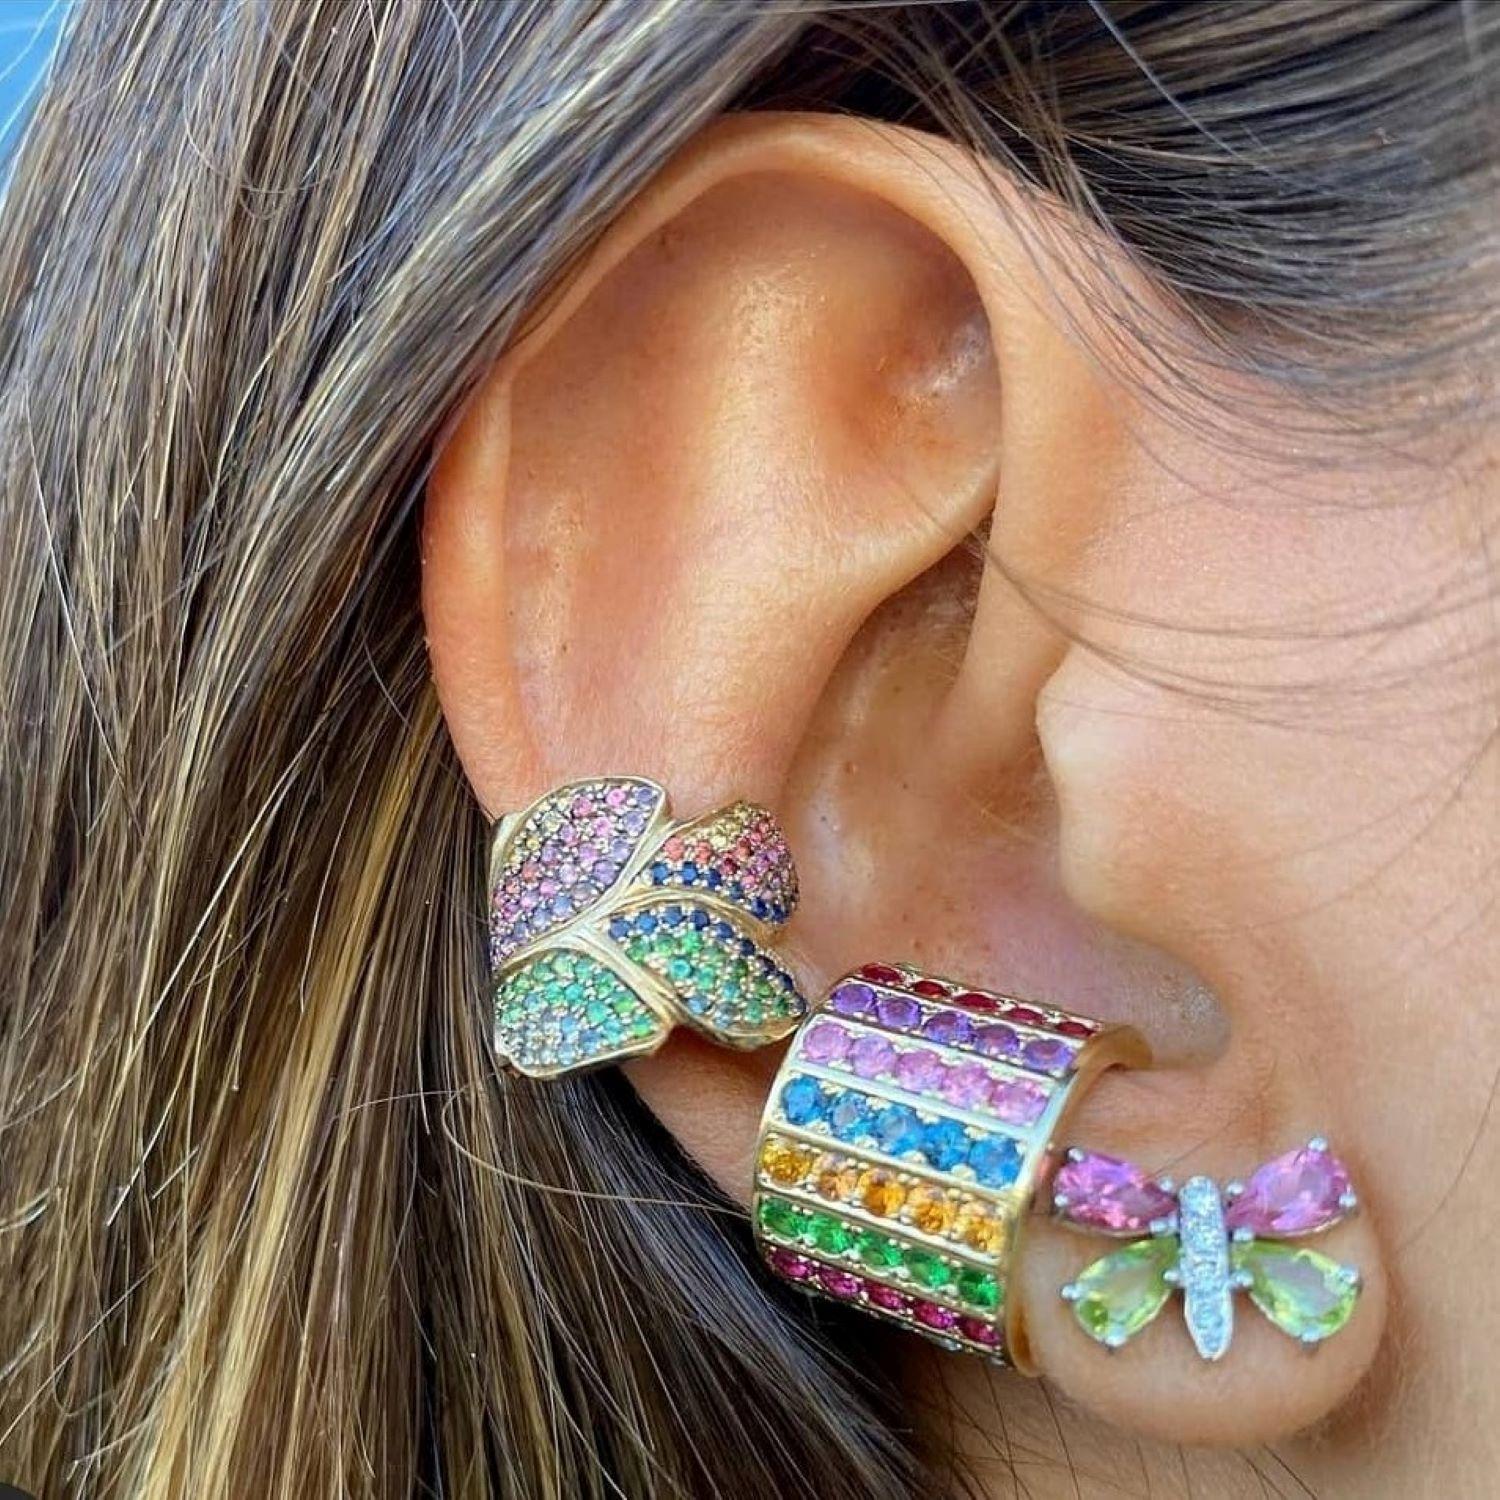 Alison Nagasue translated her love of Butterflies into these beautiful and colorful earrings. The color mix is universal with harmonious quiet Peridot and Pink Tourmaline. With the addition of a diamond pave body, it is just enough sparkle. 14K